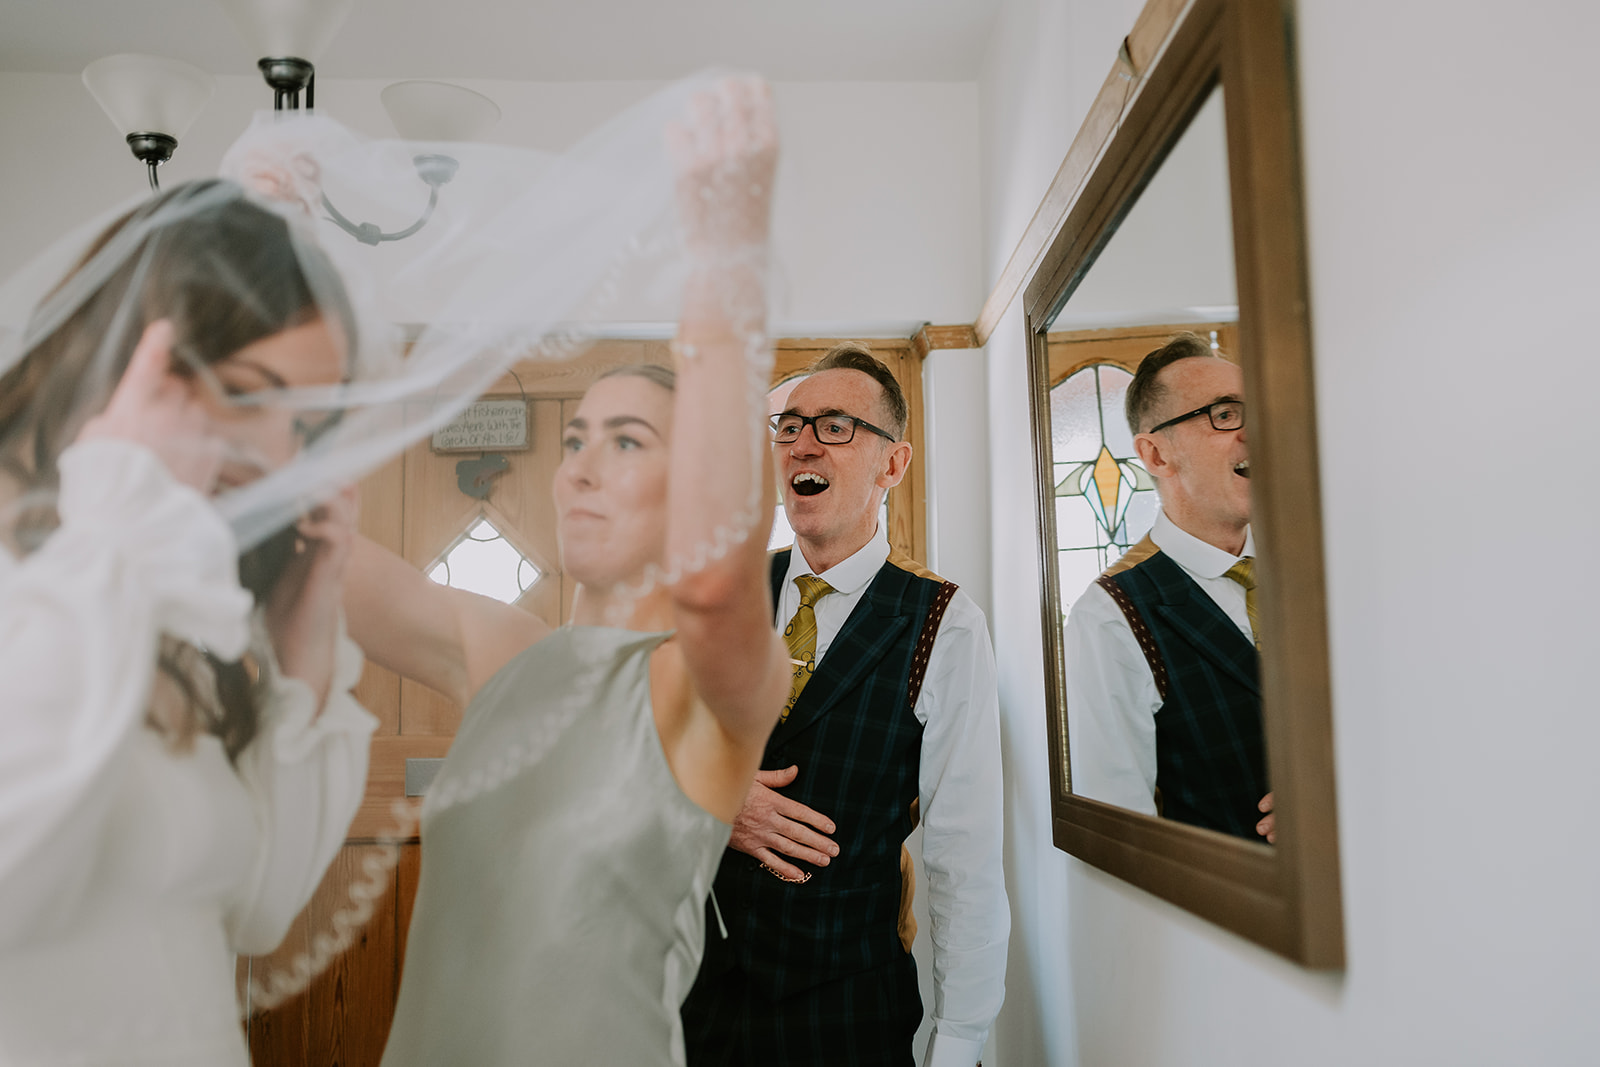 dad shocked face seeing bride for first time in wedding dress in spring brighton wedding